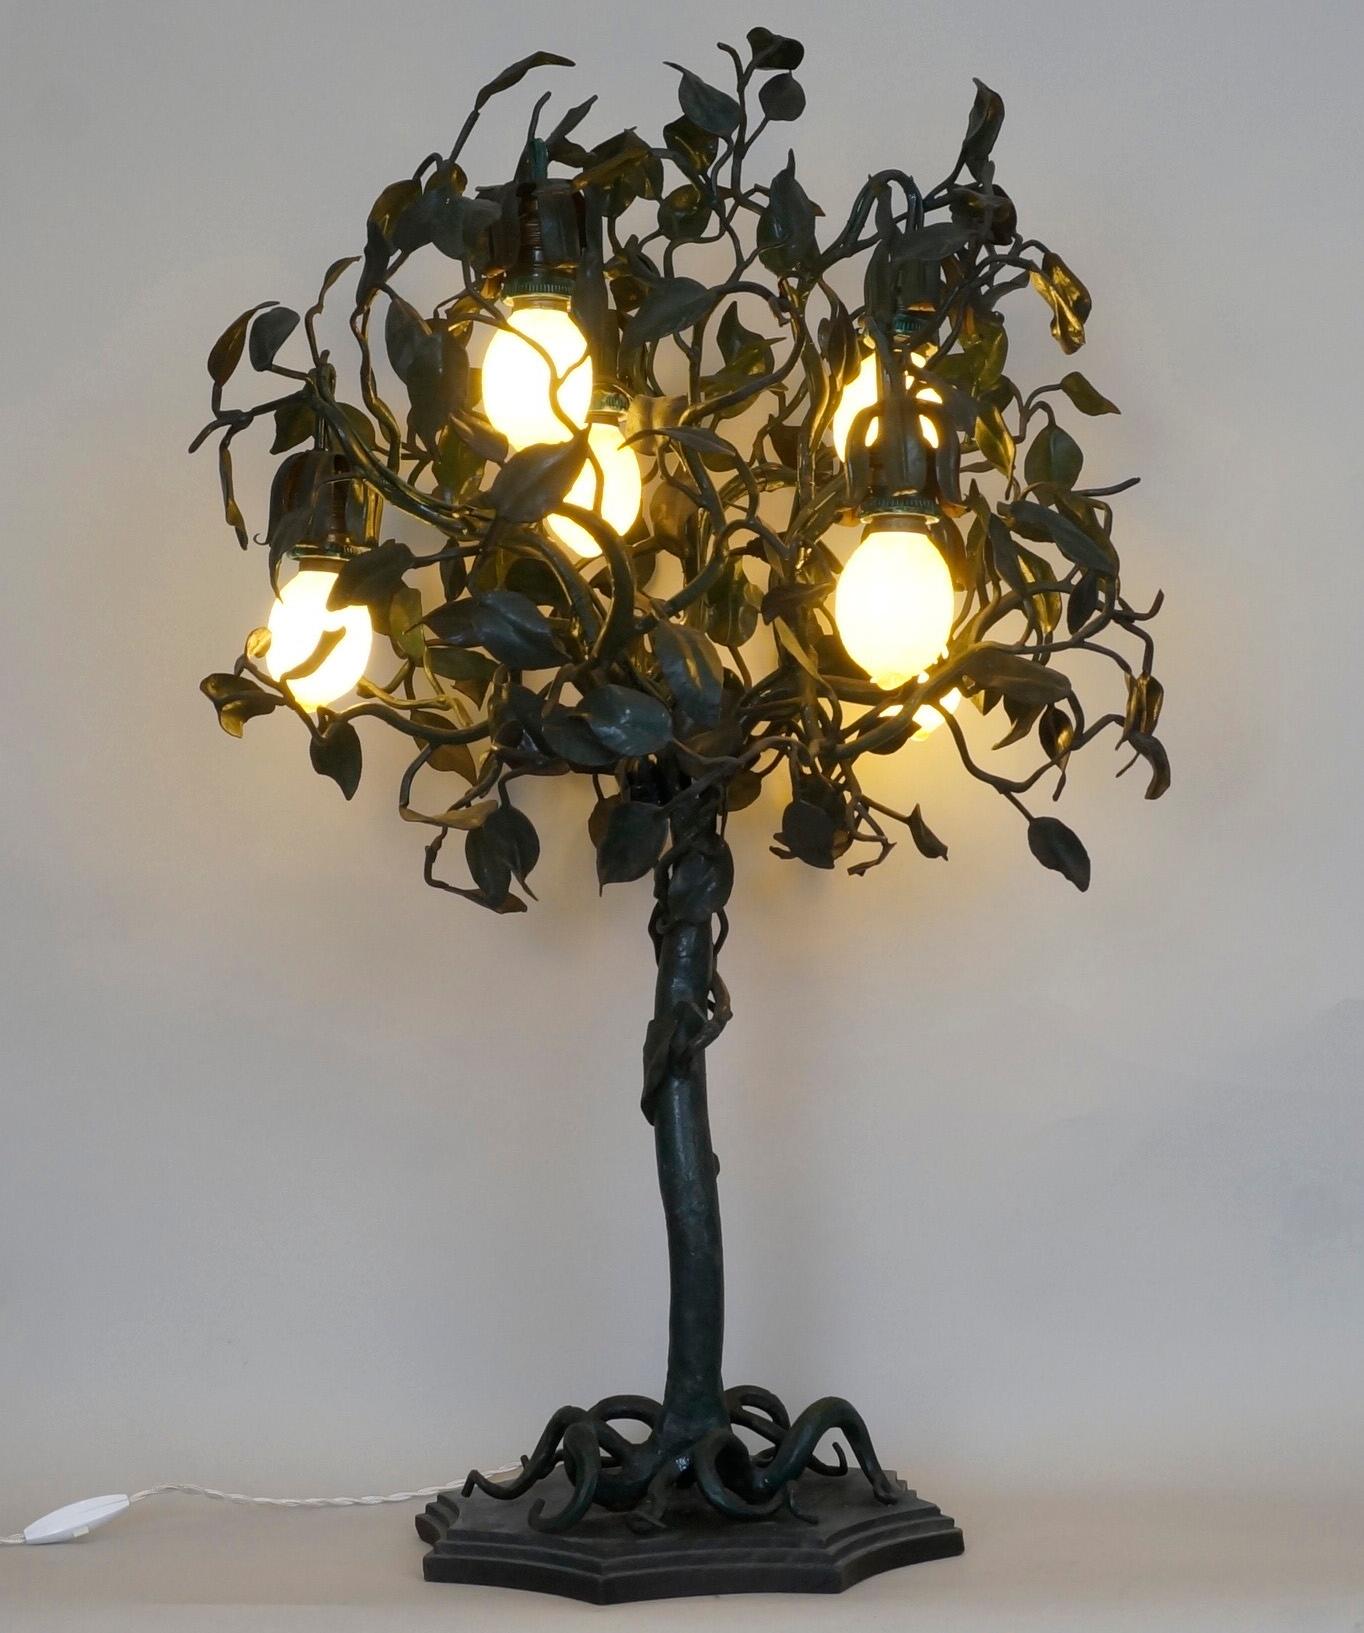 Wrought iron table lamp, lemon tree.
Rewired with twisted silk cord. 
Bulbs: lemon in glass
20th century
Measures: Height 76 cm - 29.9 in.
 